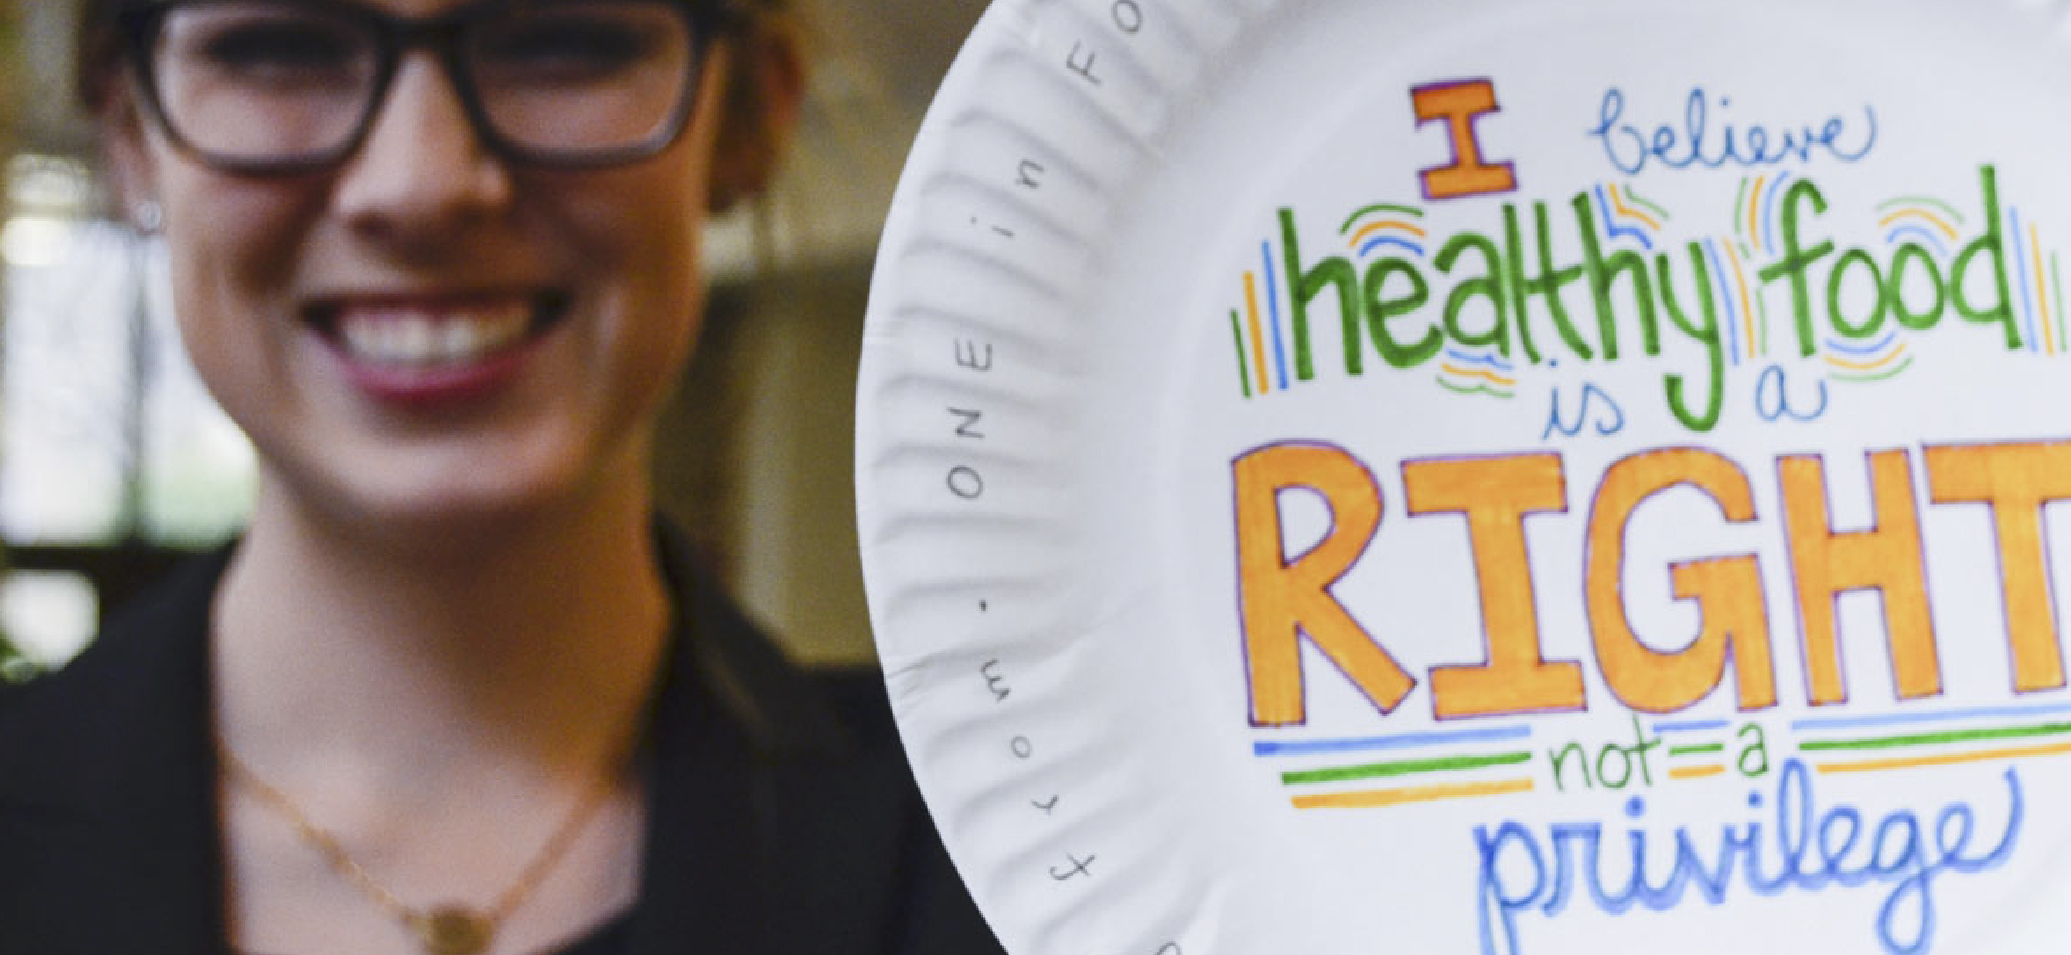 Photo of smiling female college student holding a paper plate with a handwritten message written in orange, blue and green marker that says 'I believe healthy food is a right not a privilege'.